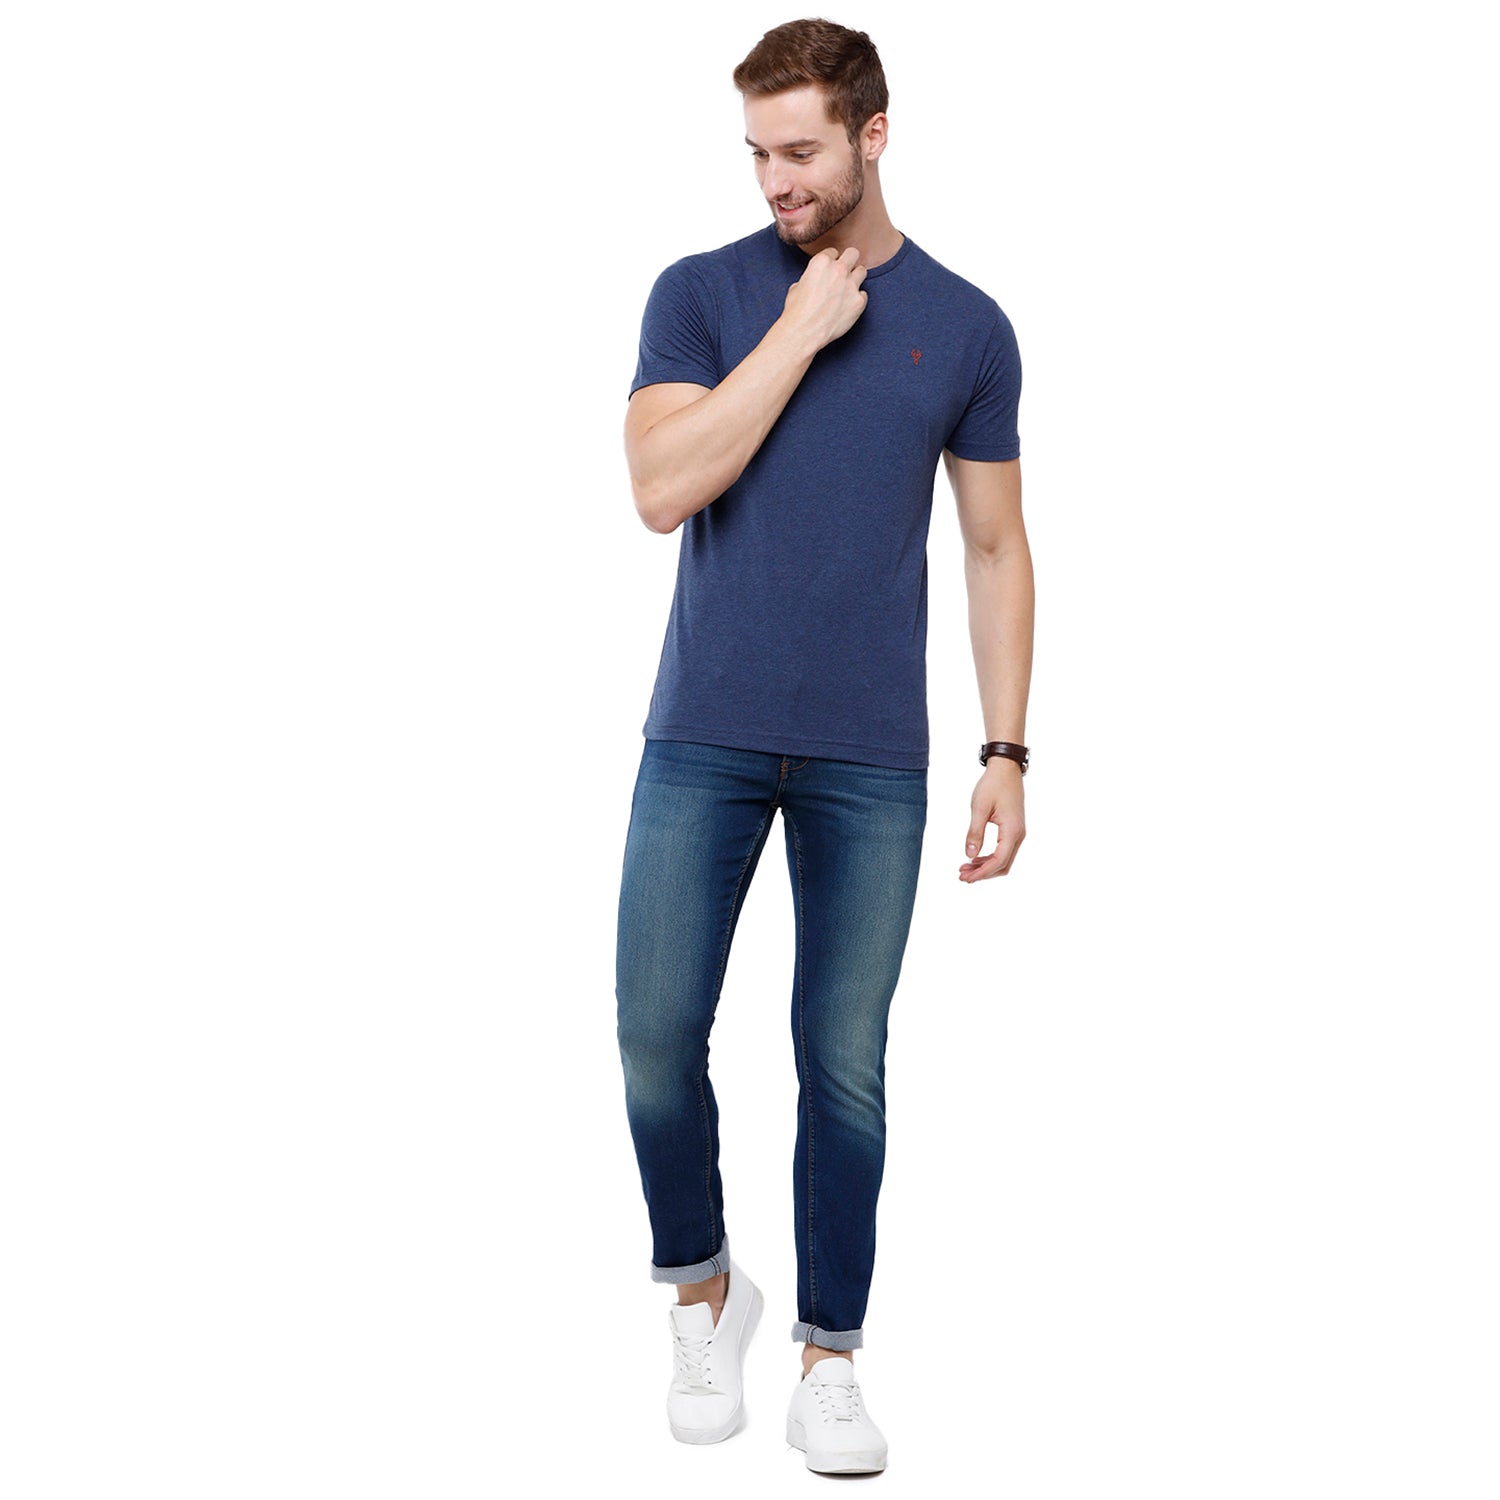 Classic Polo Men's Solid Single Jersey Blue Half Sleeve Slim Fit T-Shirt - Kore-11 T-shirt Classic Polo 